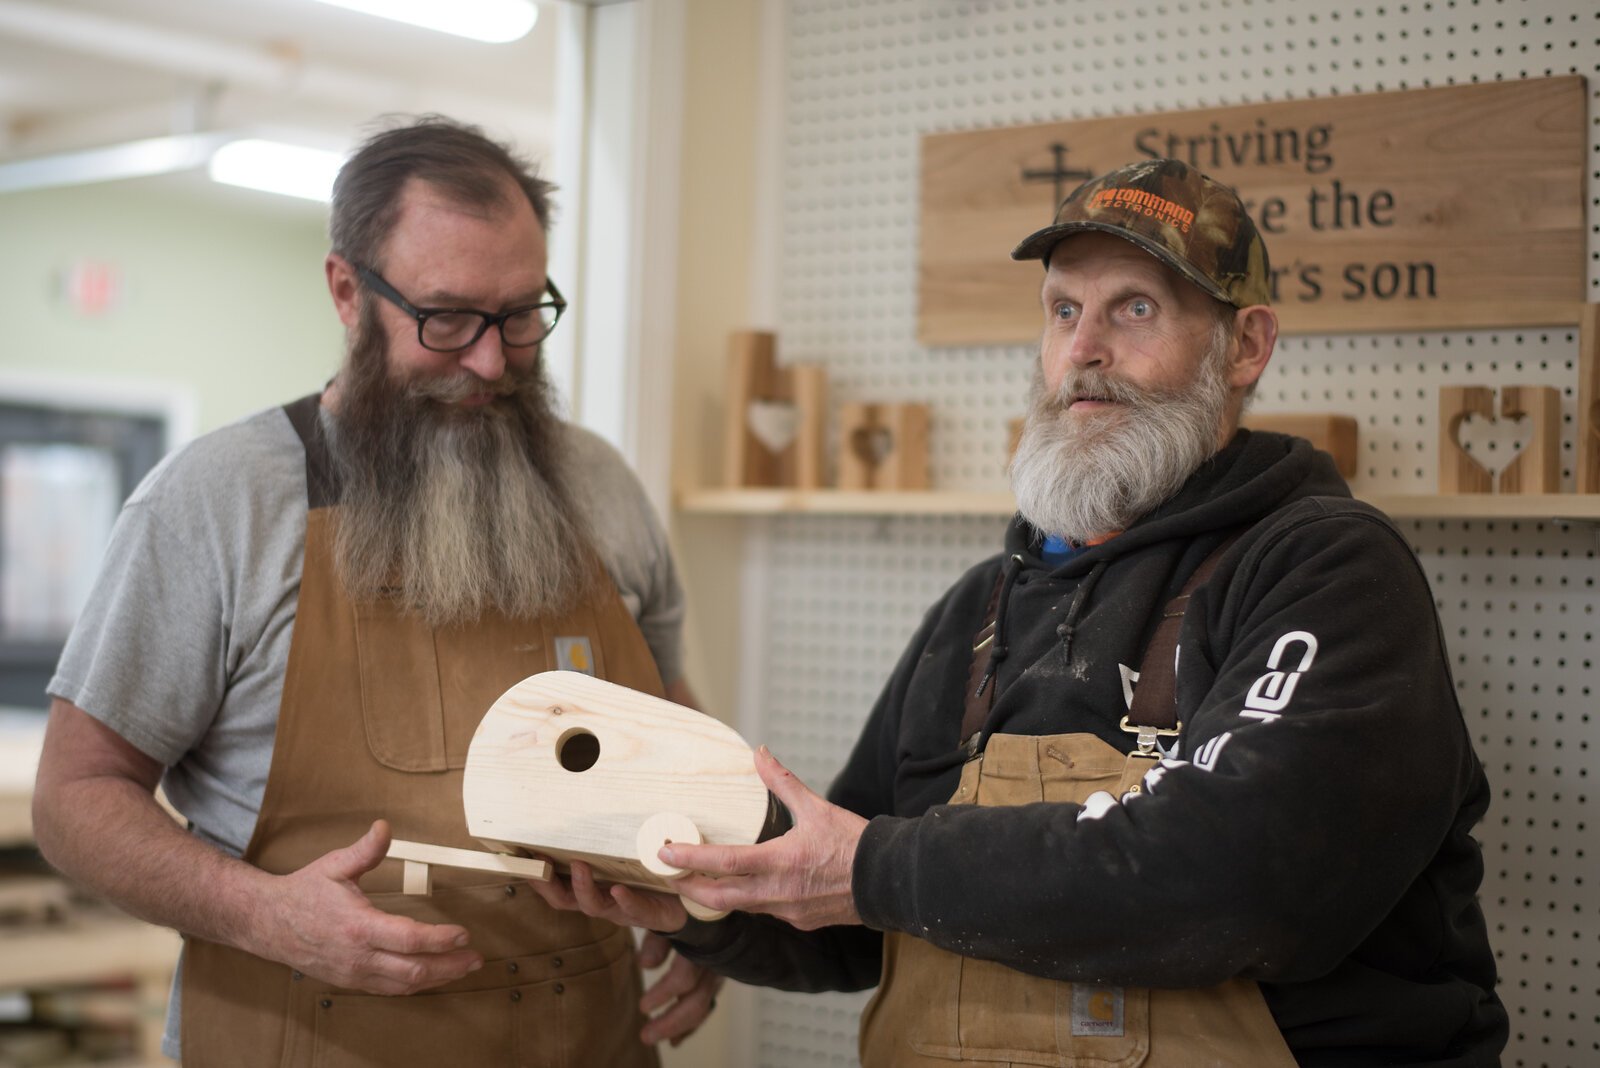 Residents and participants learn skills in the woodshop.